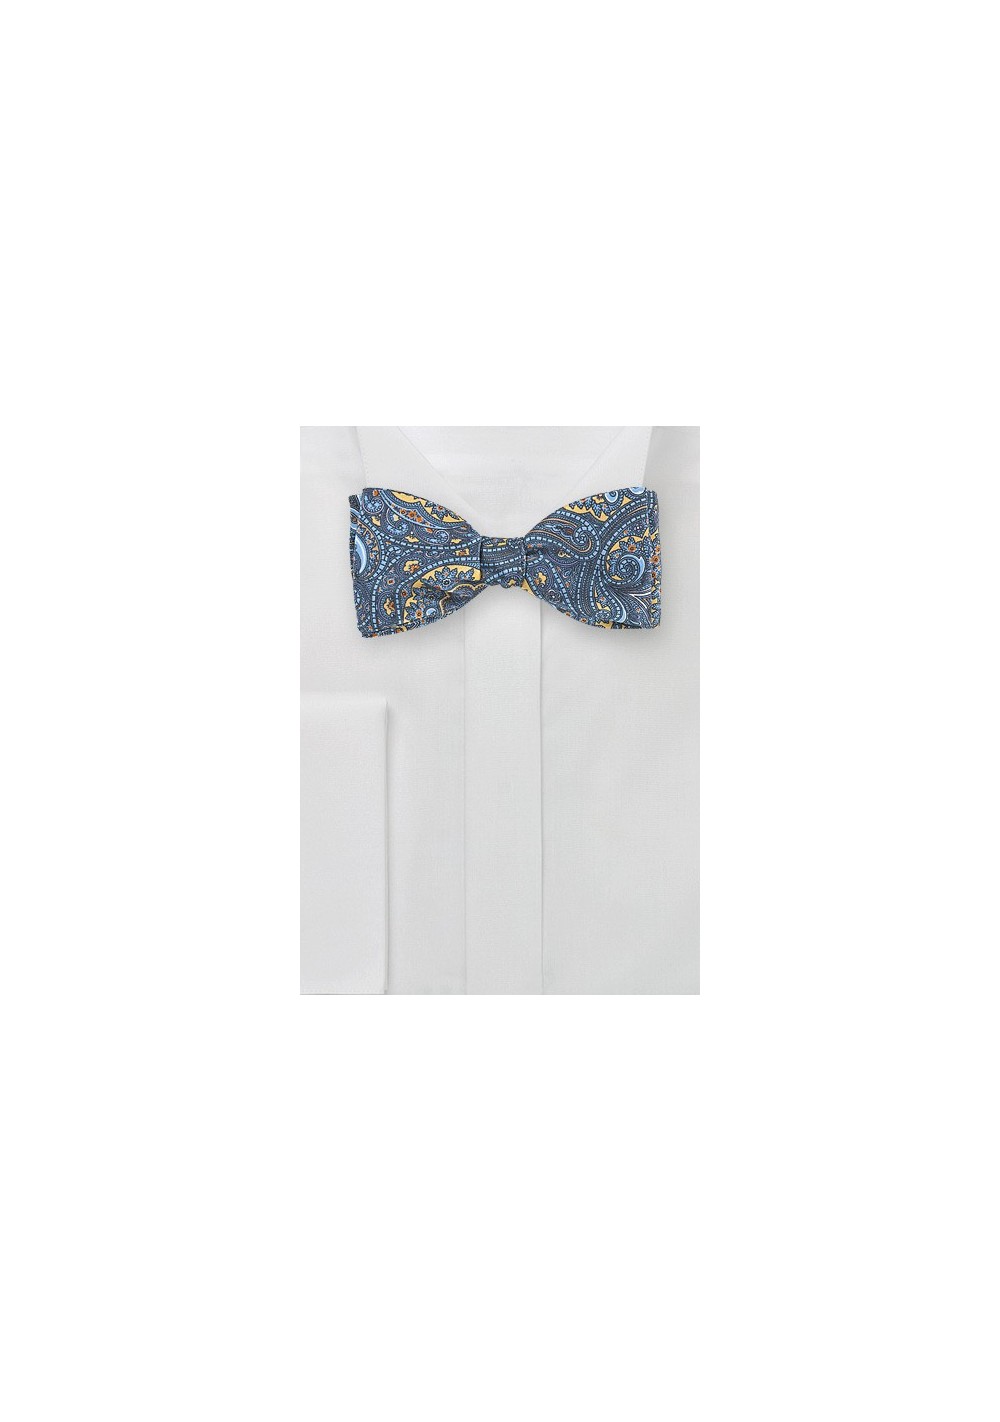 Moroccan Paisley Bow Tie in Yellow and Blue